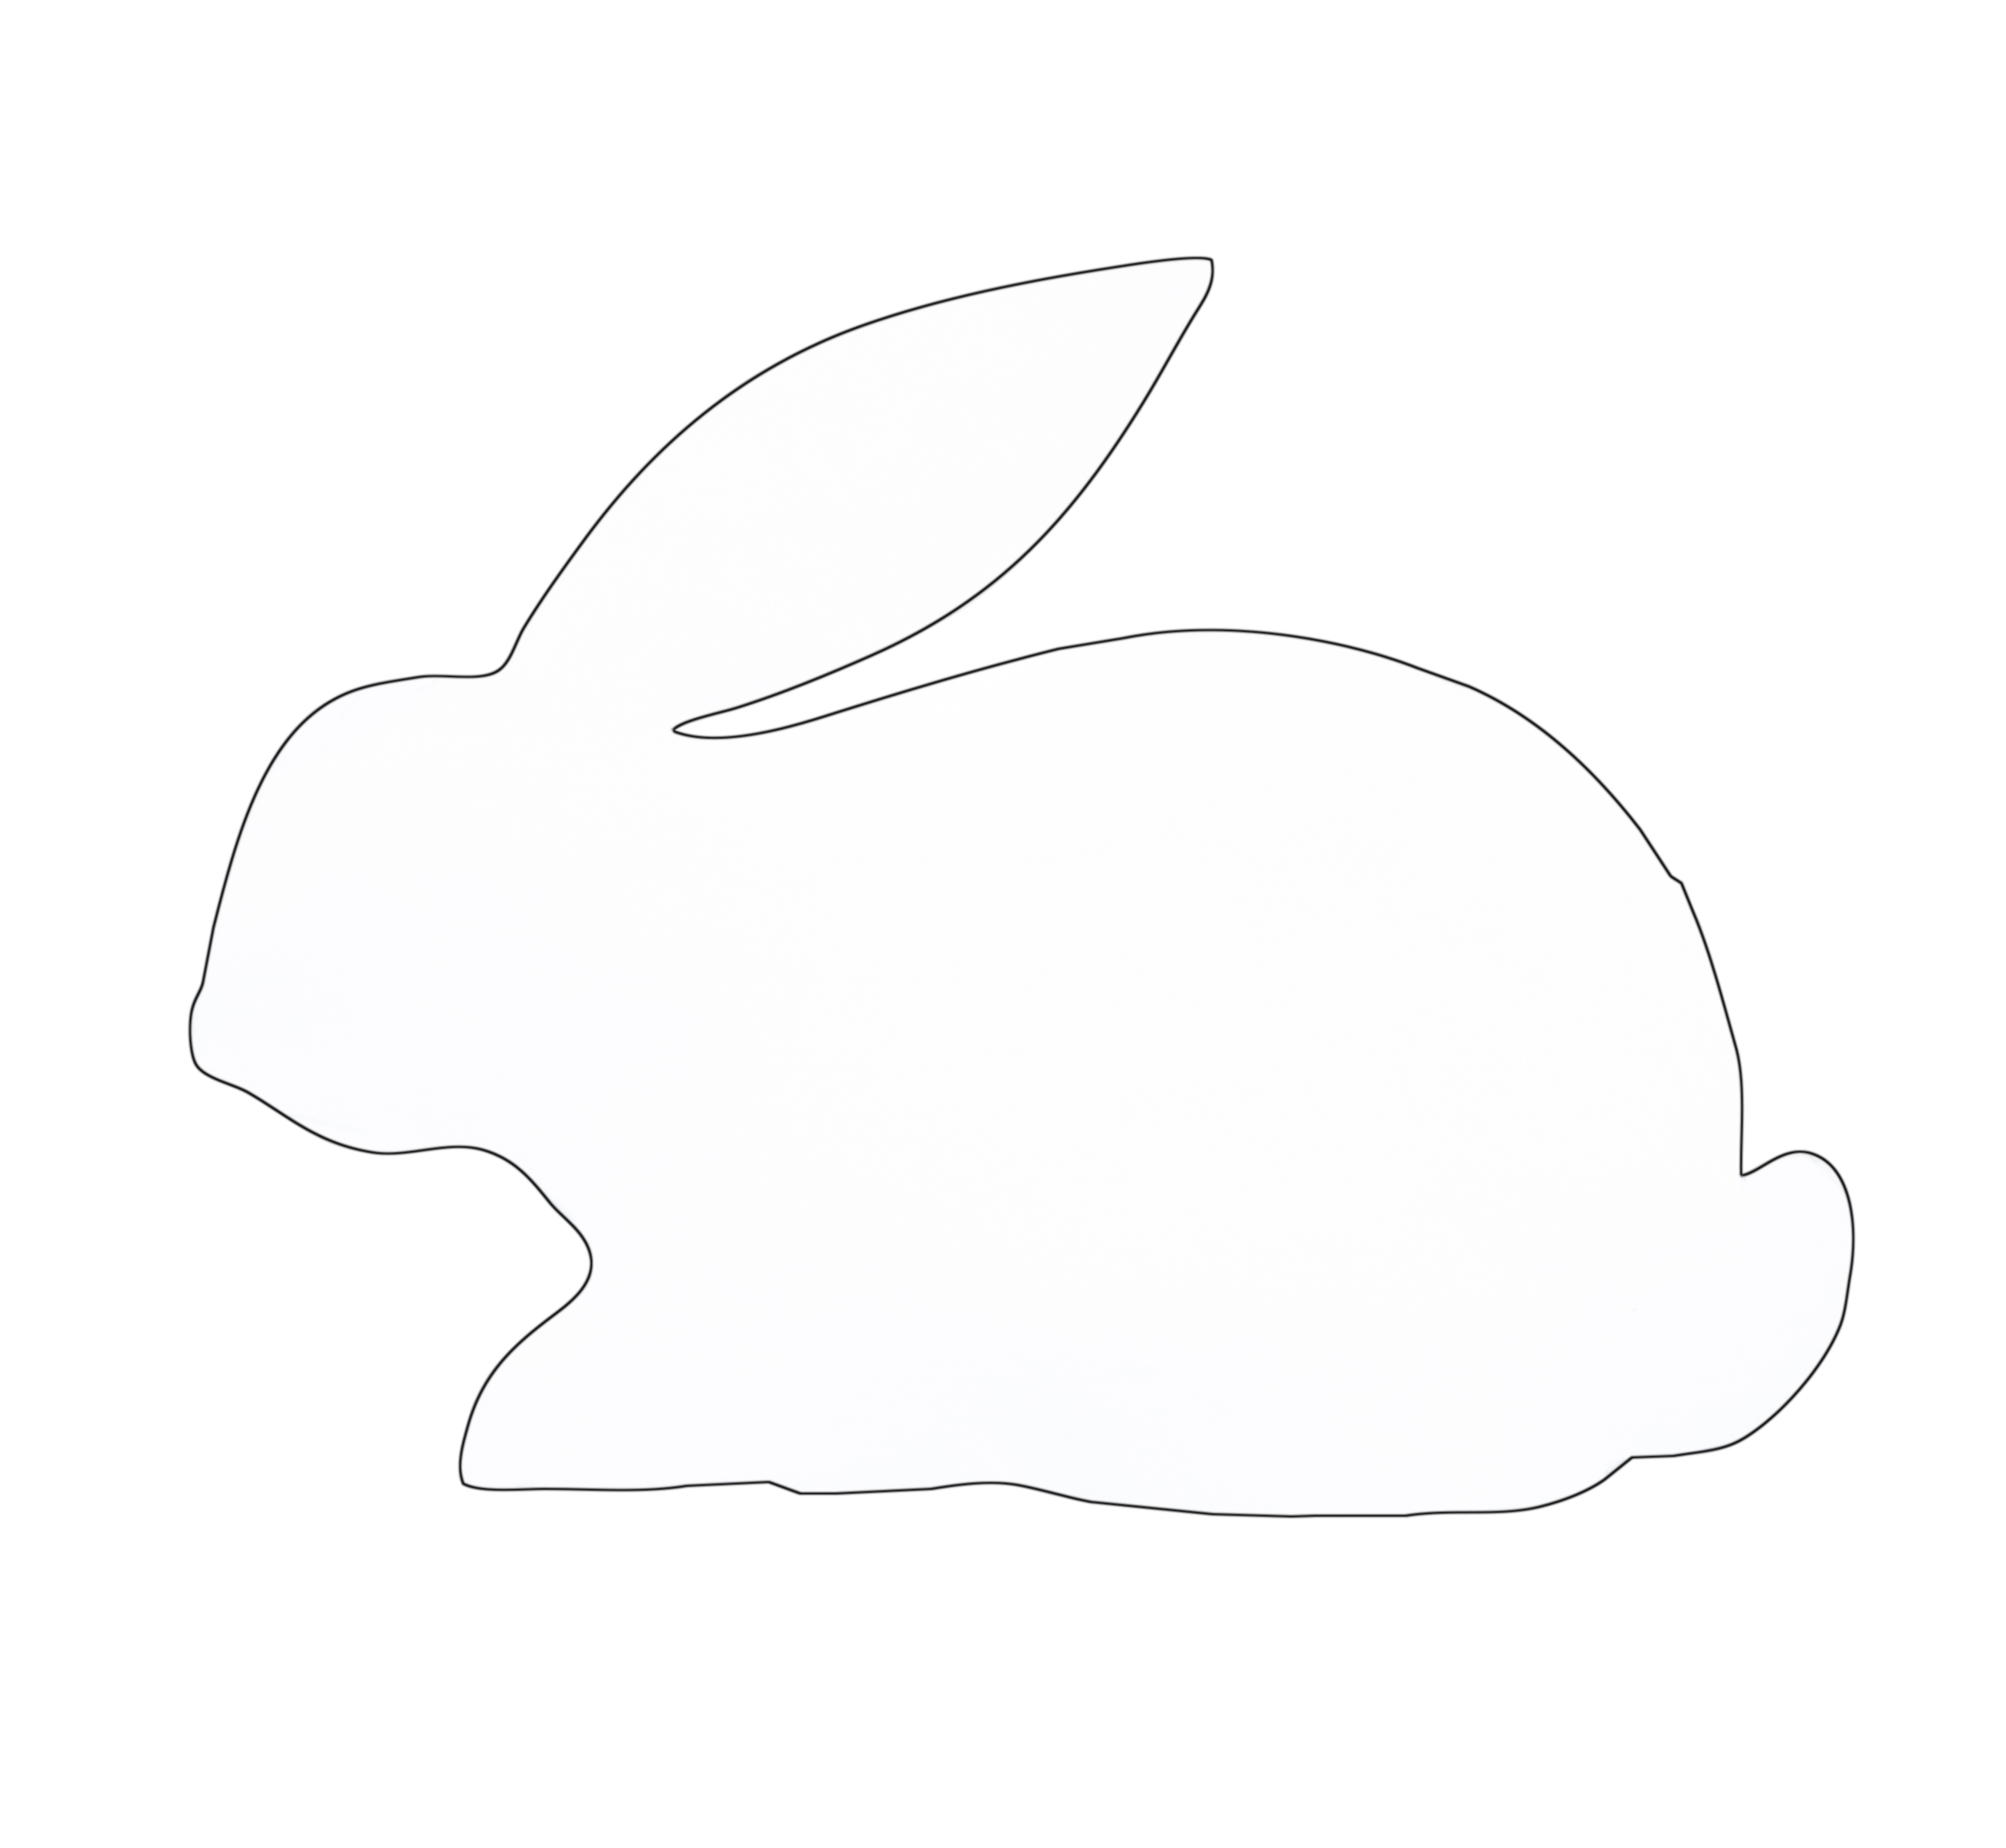 Free Bunny Outline, Download Free Clip Art, Free Clip Art on Clipart.